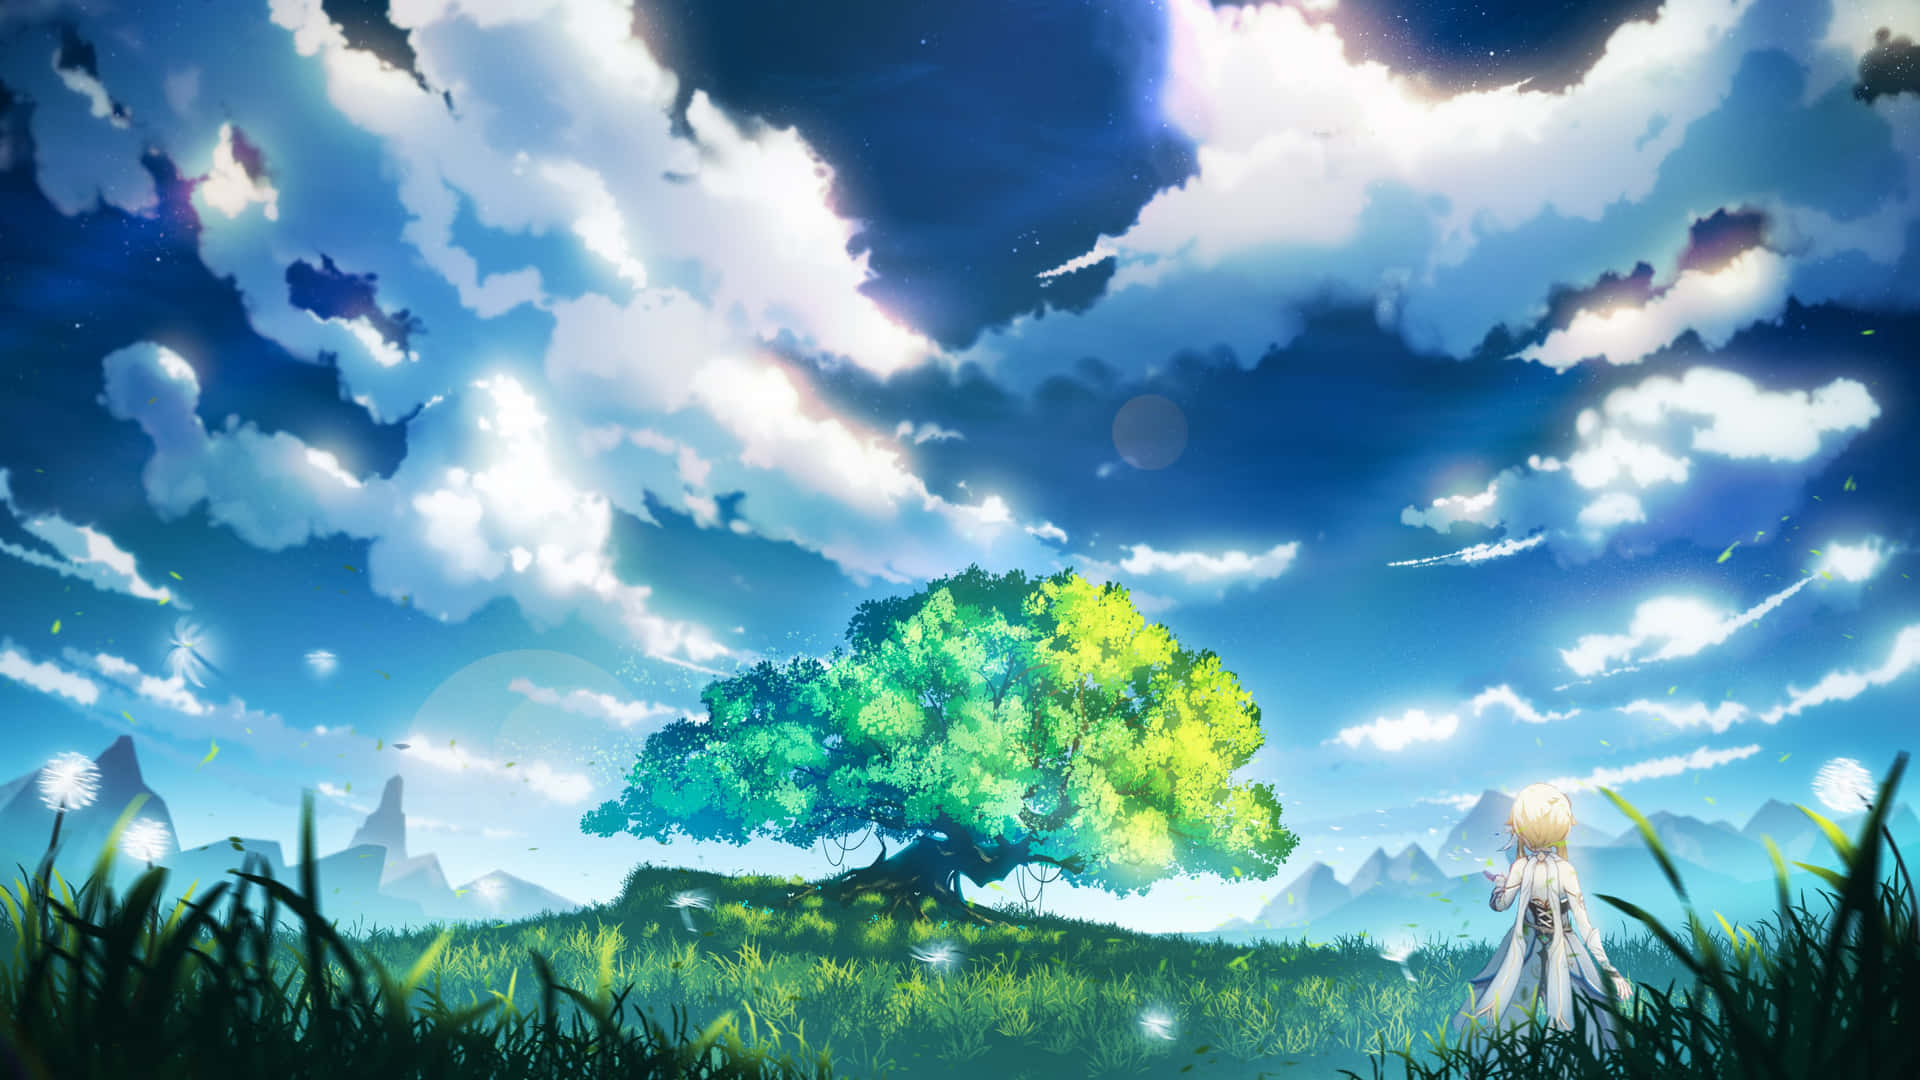 Genshin_ Impact_ Serene_ Landscape_with_ Character Wallpaper